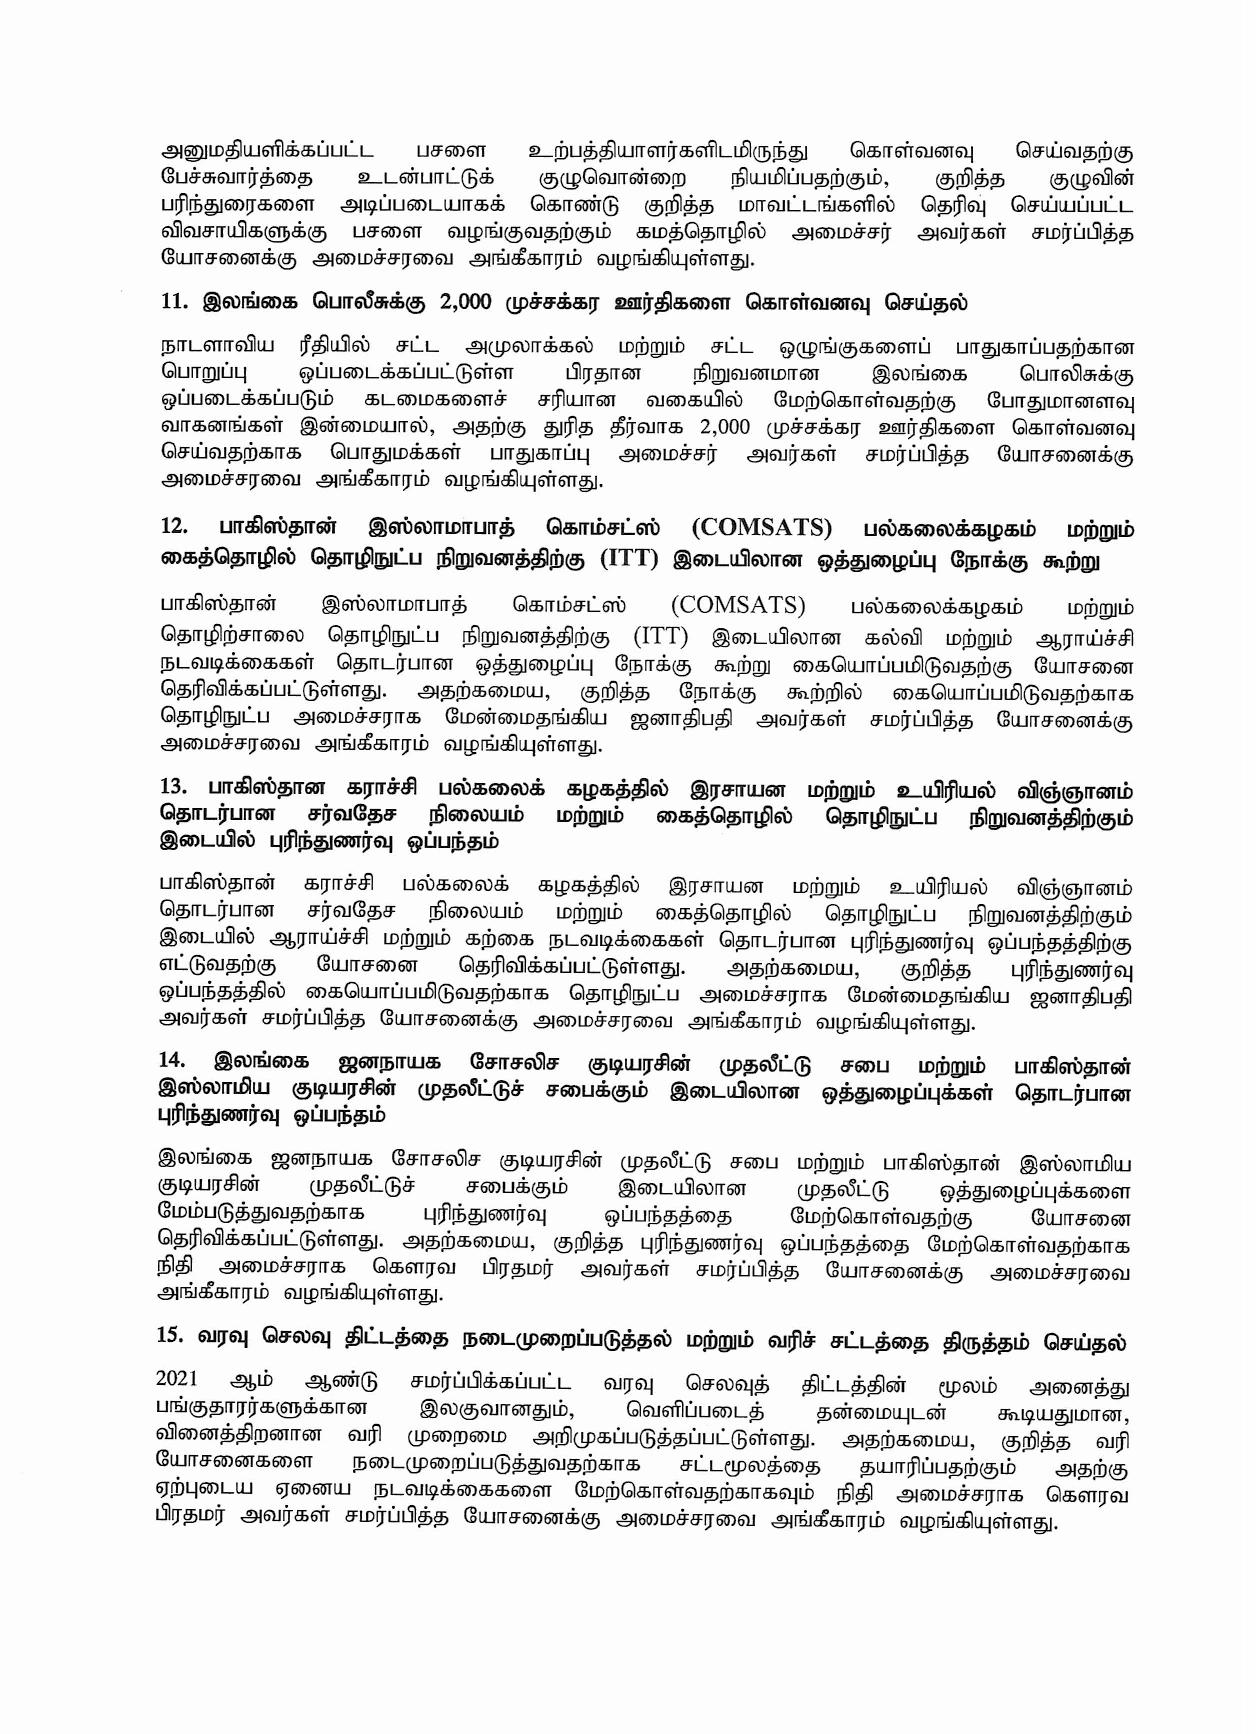 Cabinet Decision on 22.02.2021 Tamil page 004